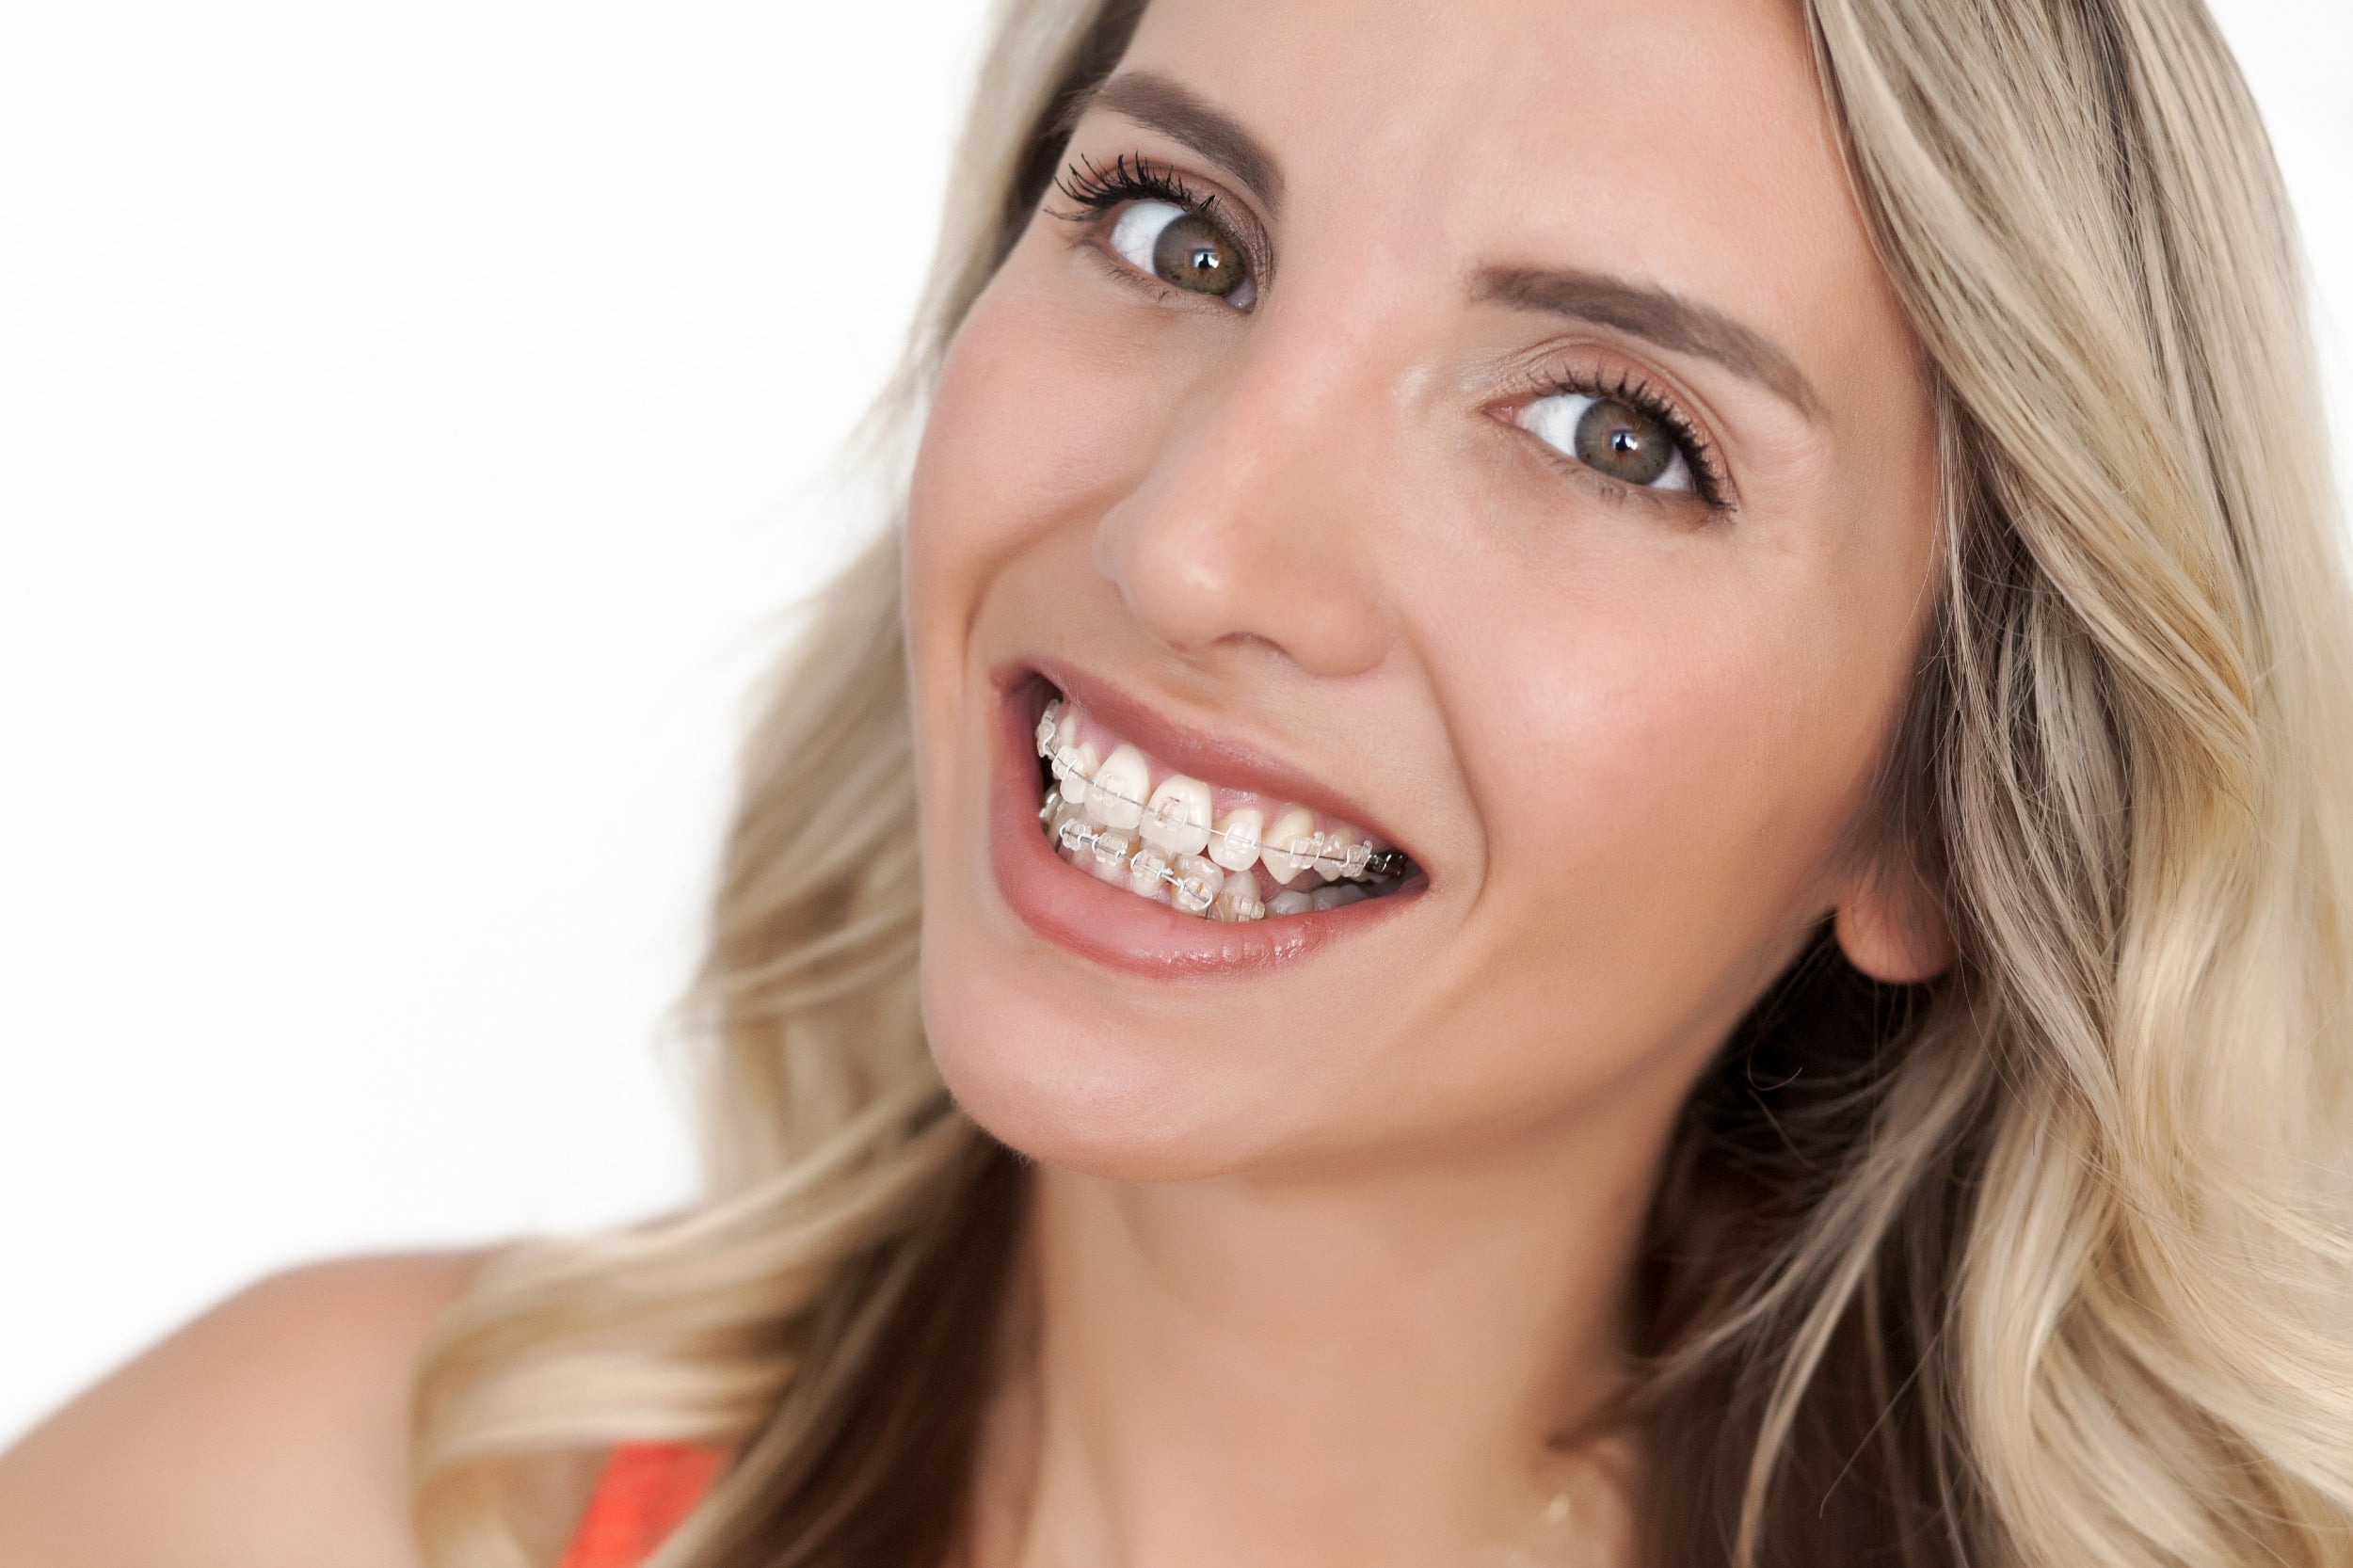 Getting your braces off? Here's what to expect!